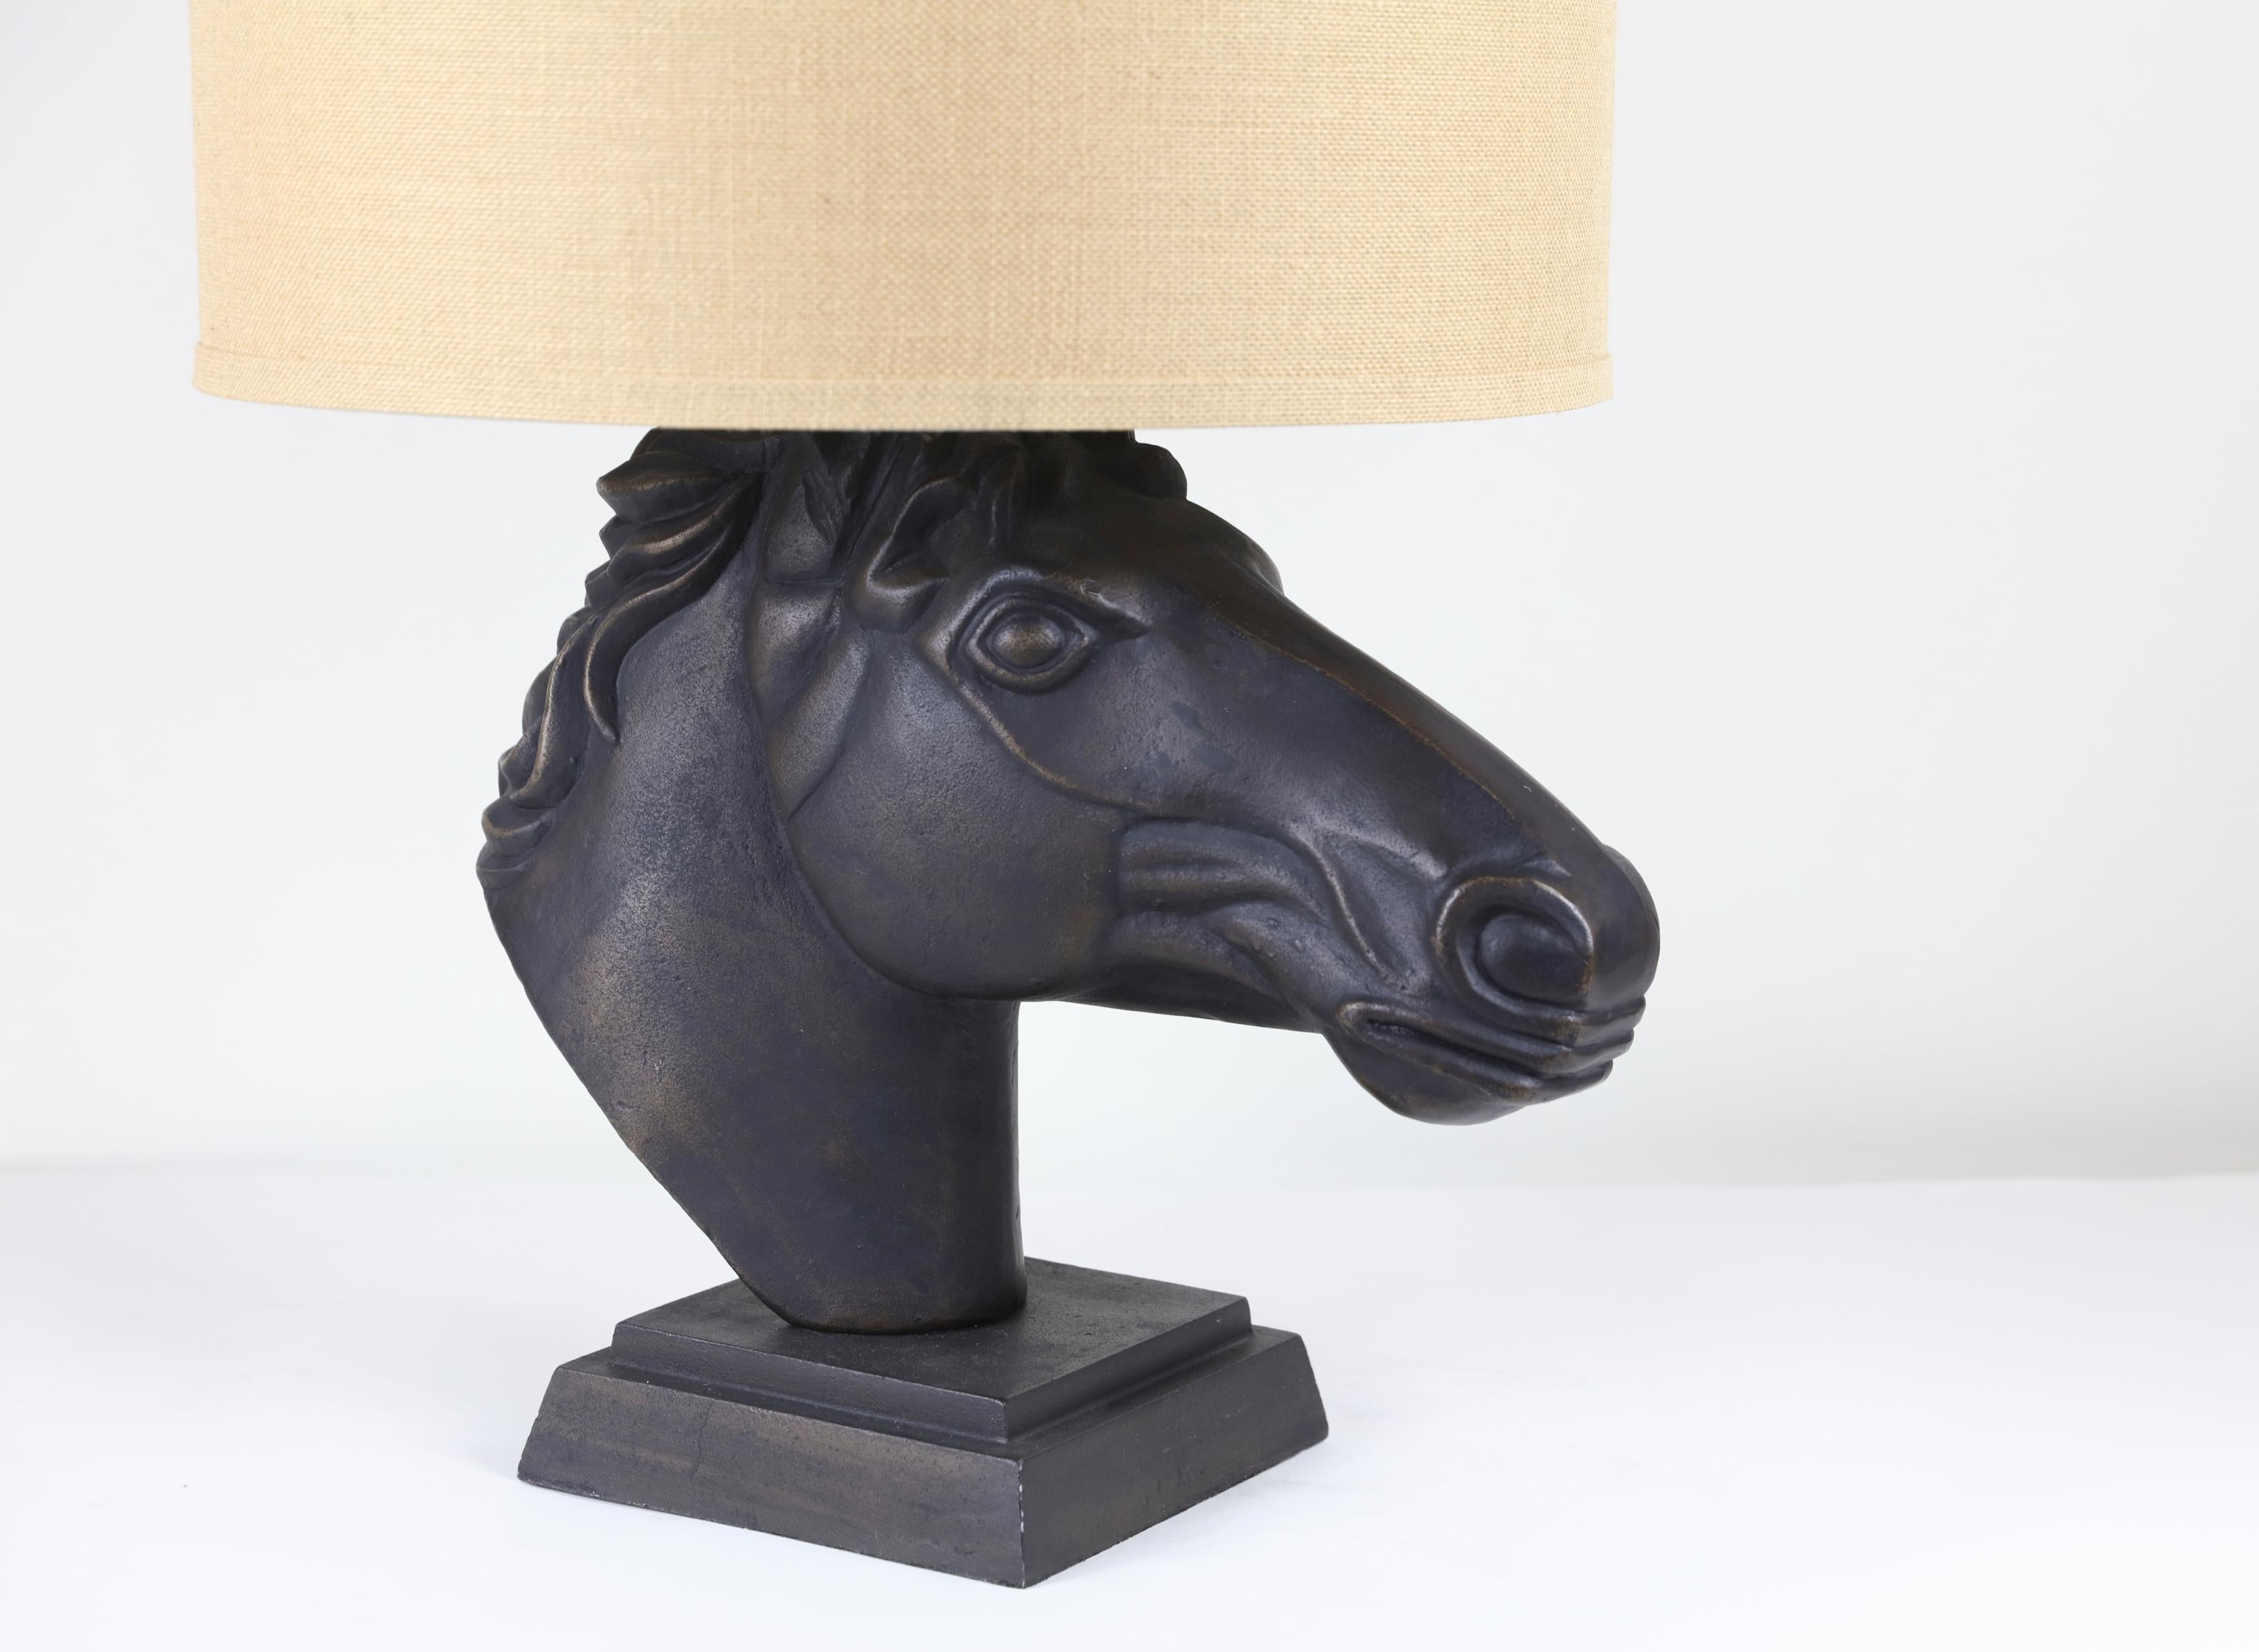 Horse table lamp

Measures: 27